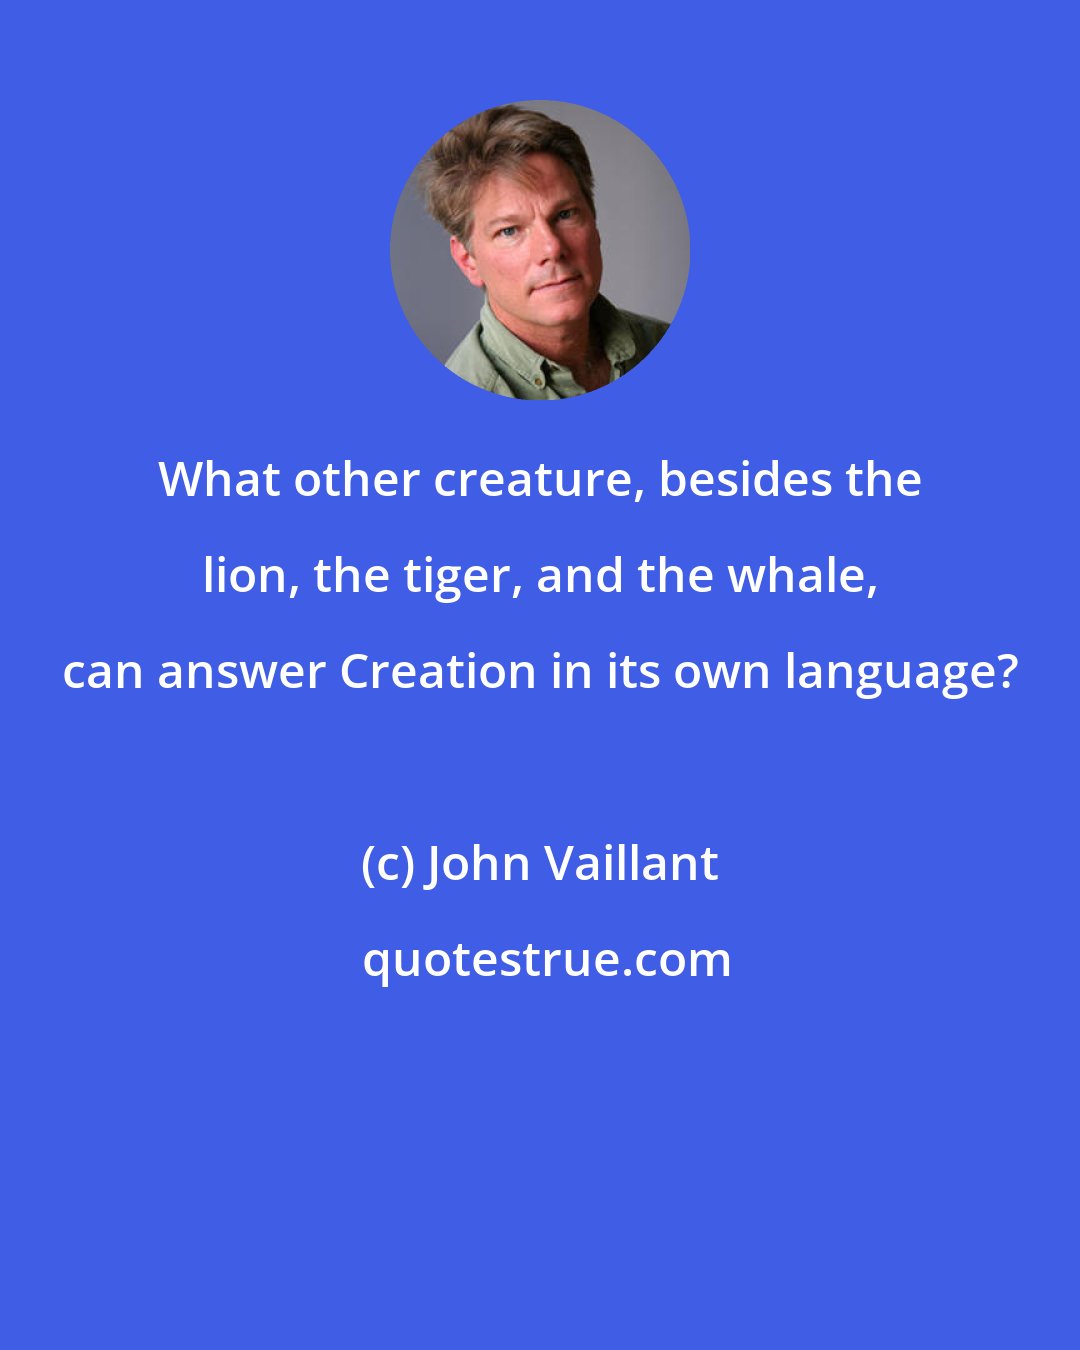 John Vaillant: What other creature, besides the lion, the tiger, and the whale, can answer Creation in its own language?